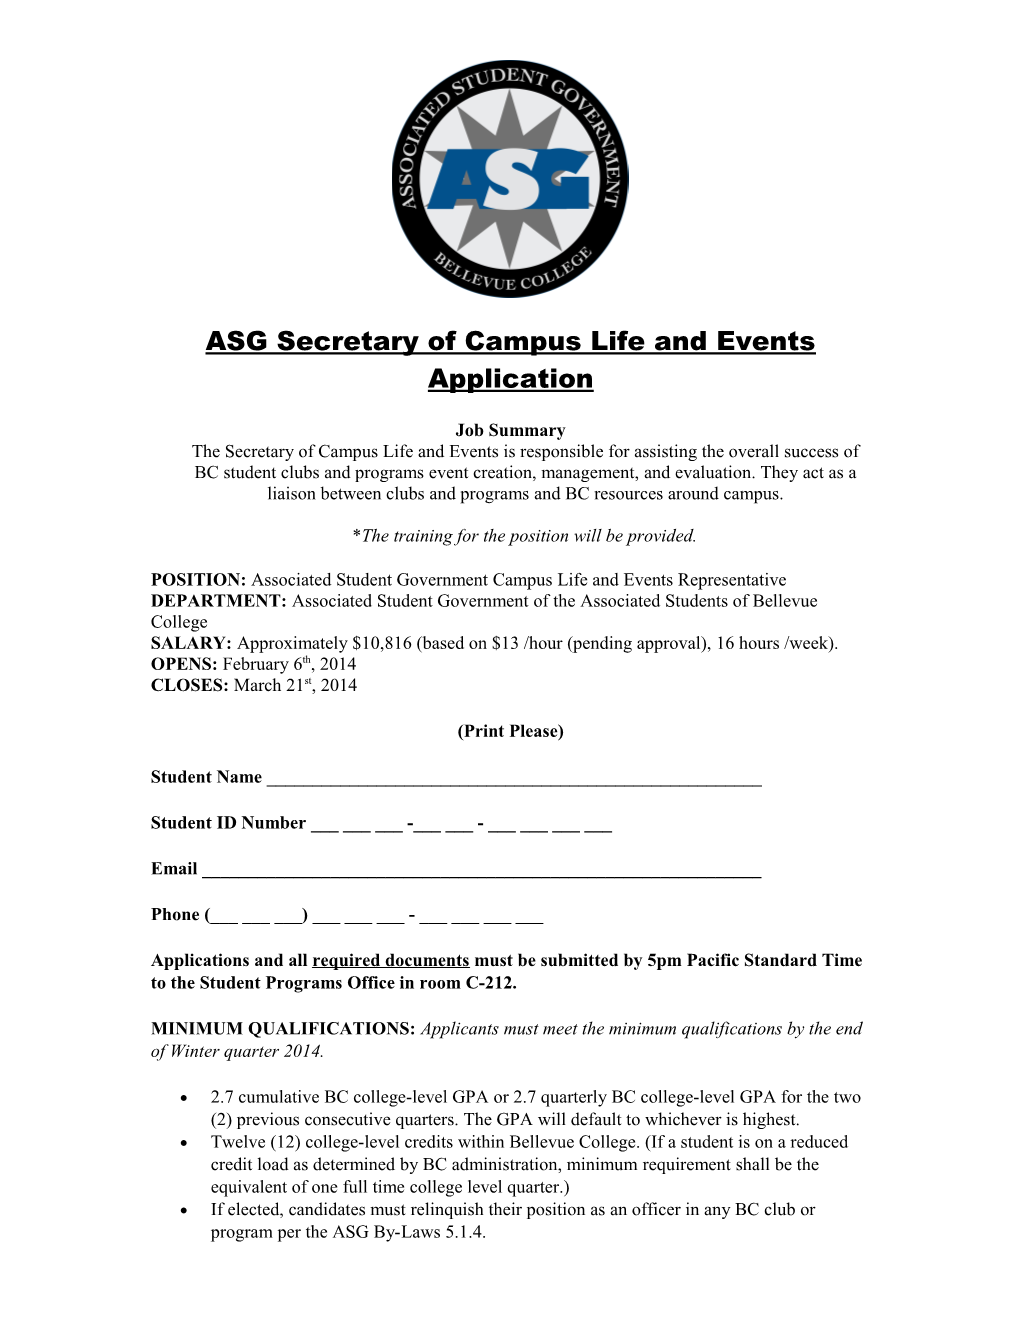 ASG Secretary of Campus Life and Events Application